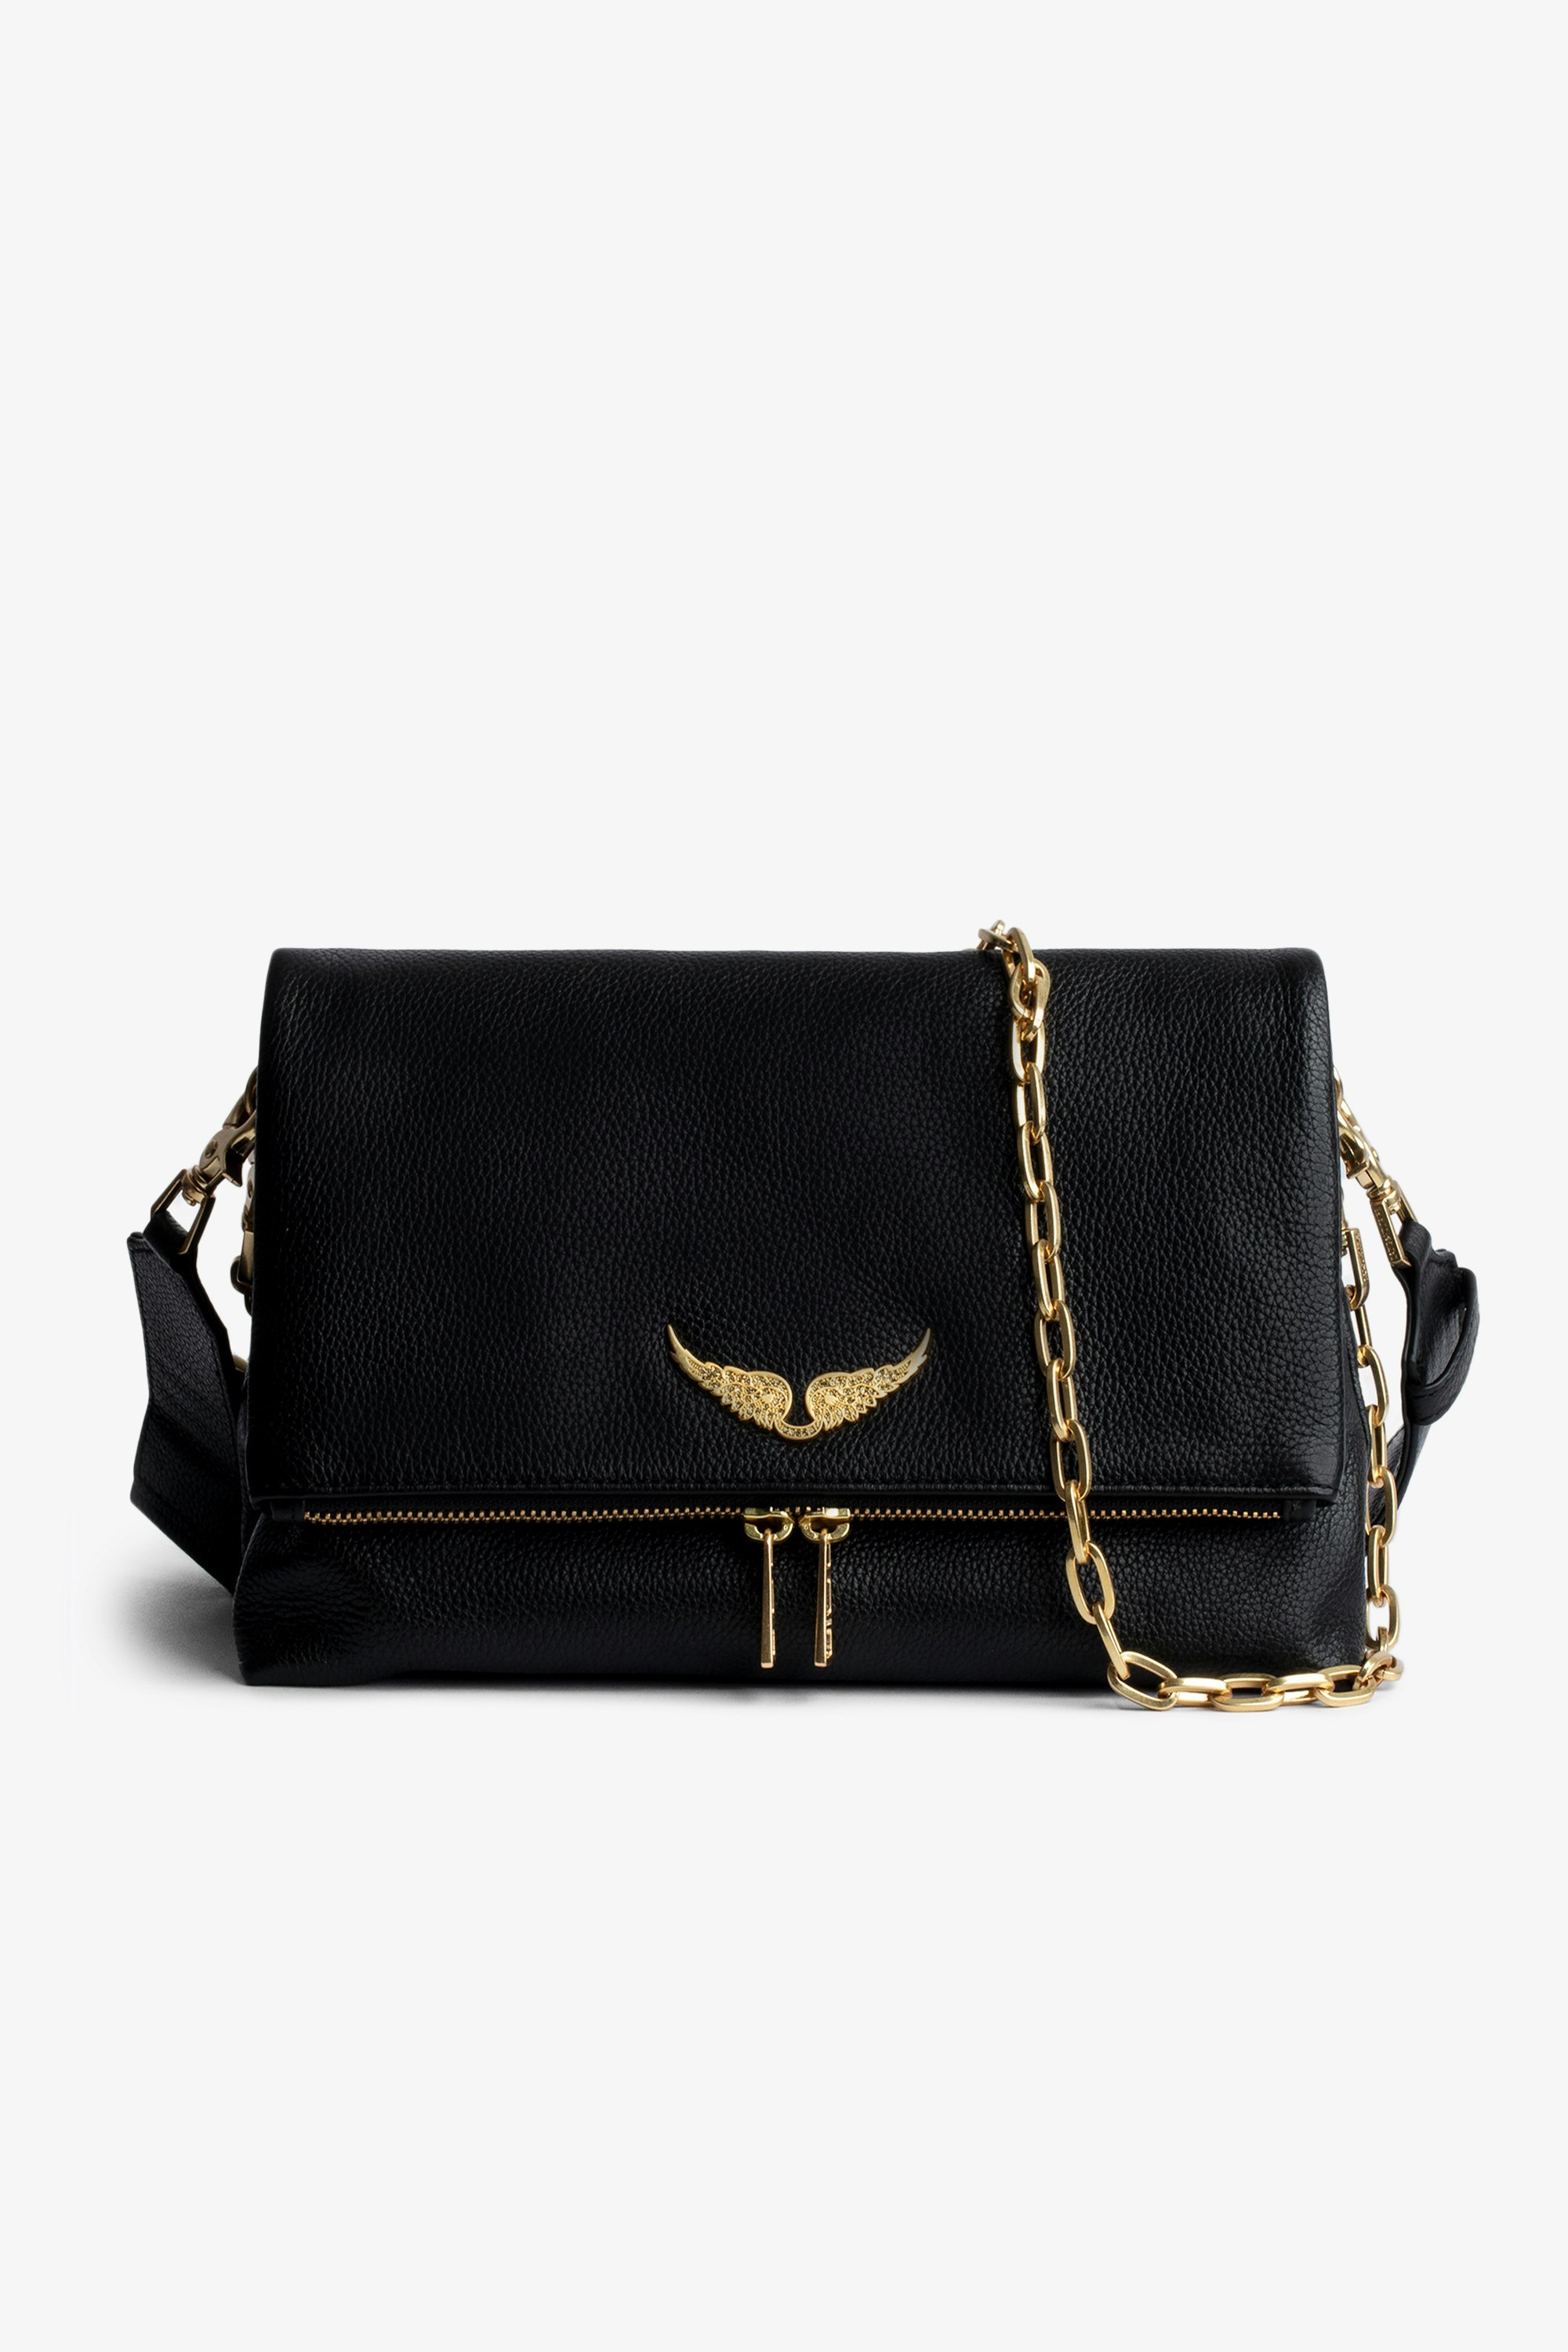 Rocky Bag Women’s black grained leather bag with gold-toned chains and shoulder strap